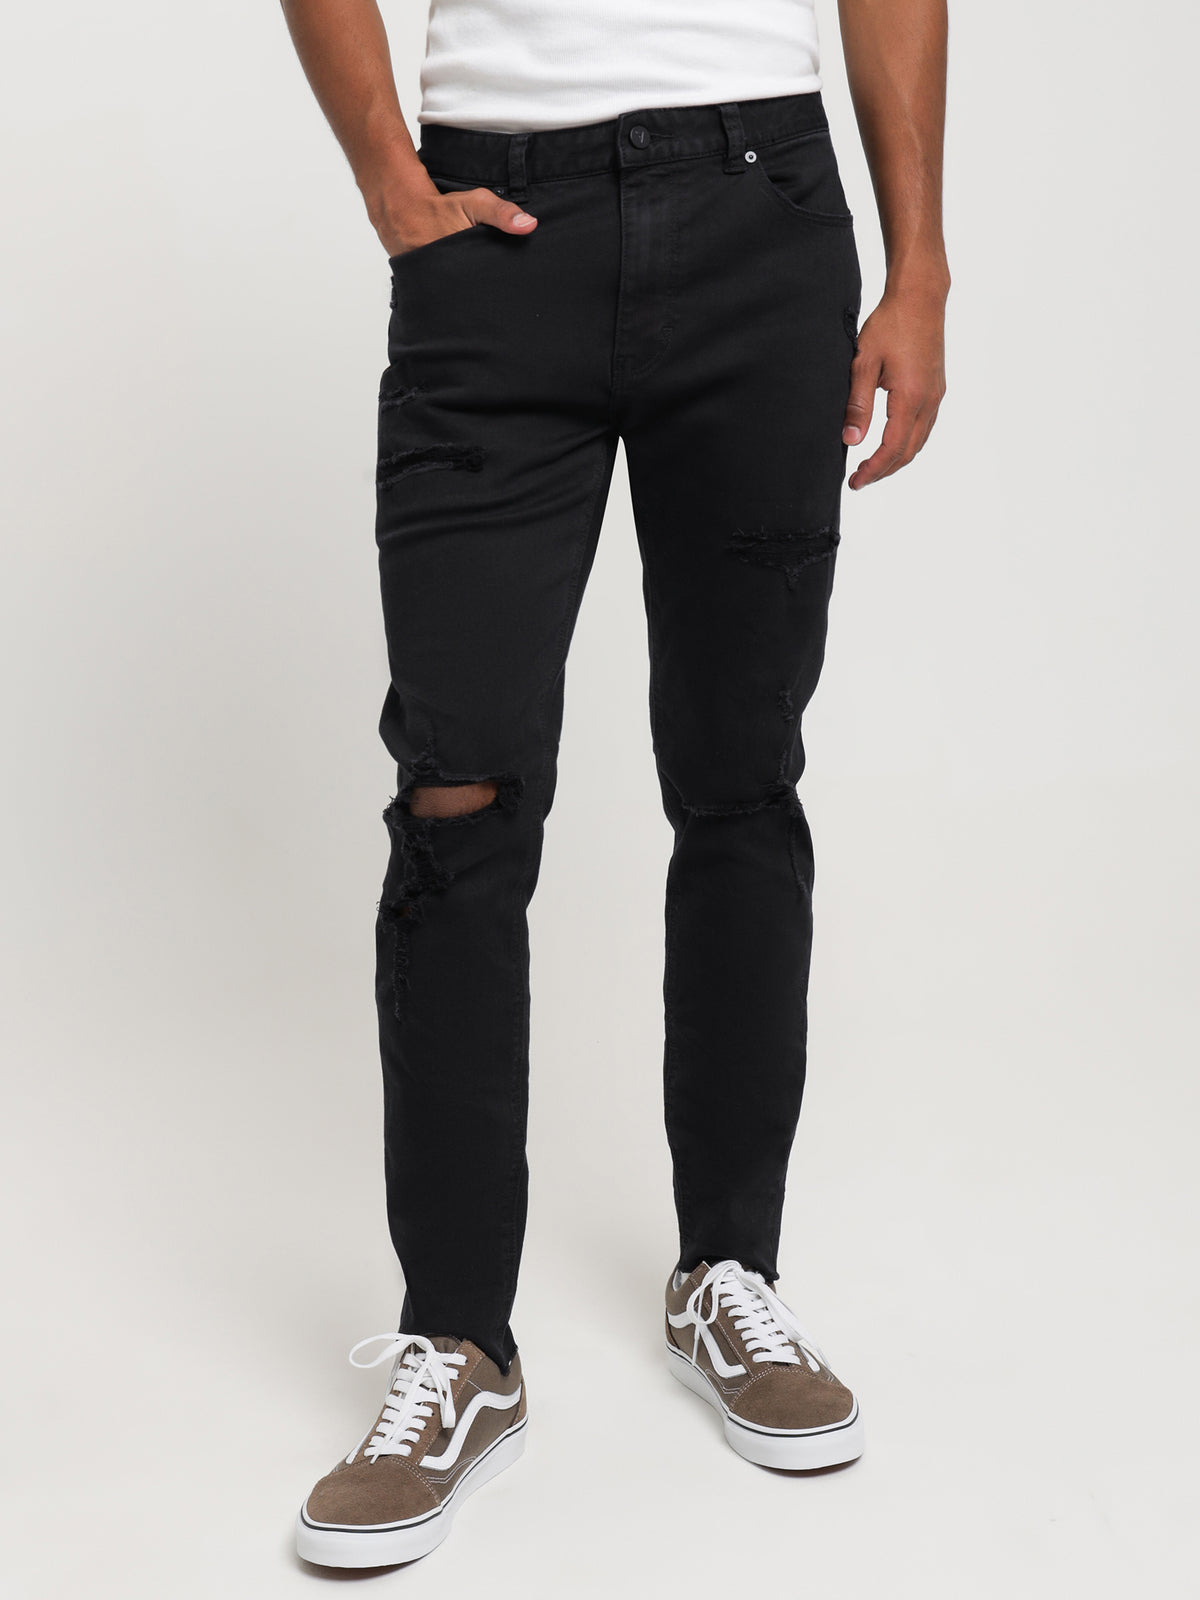 A Dropped Slim Turn Up Jeans Rogue Black